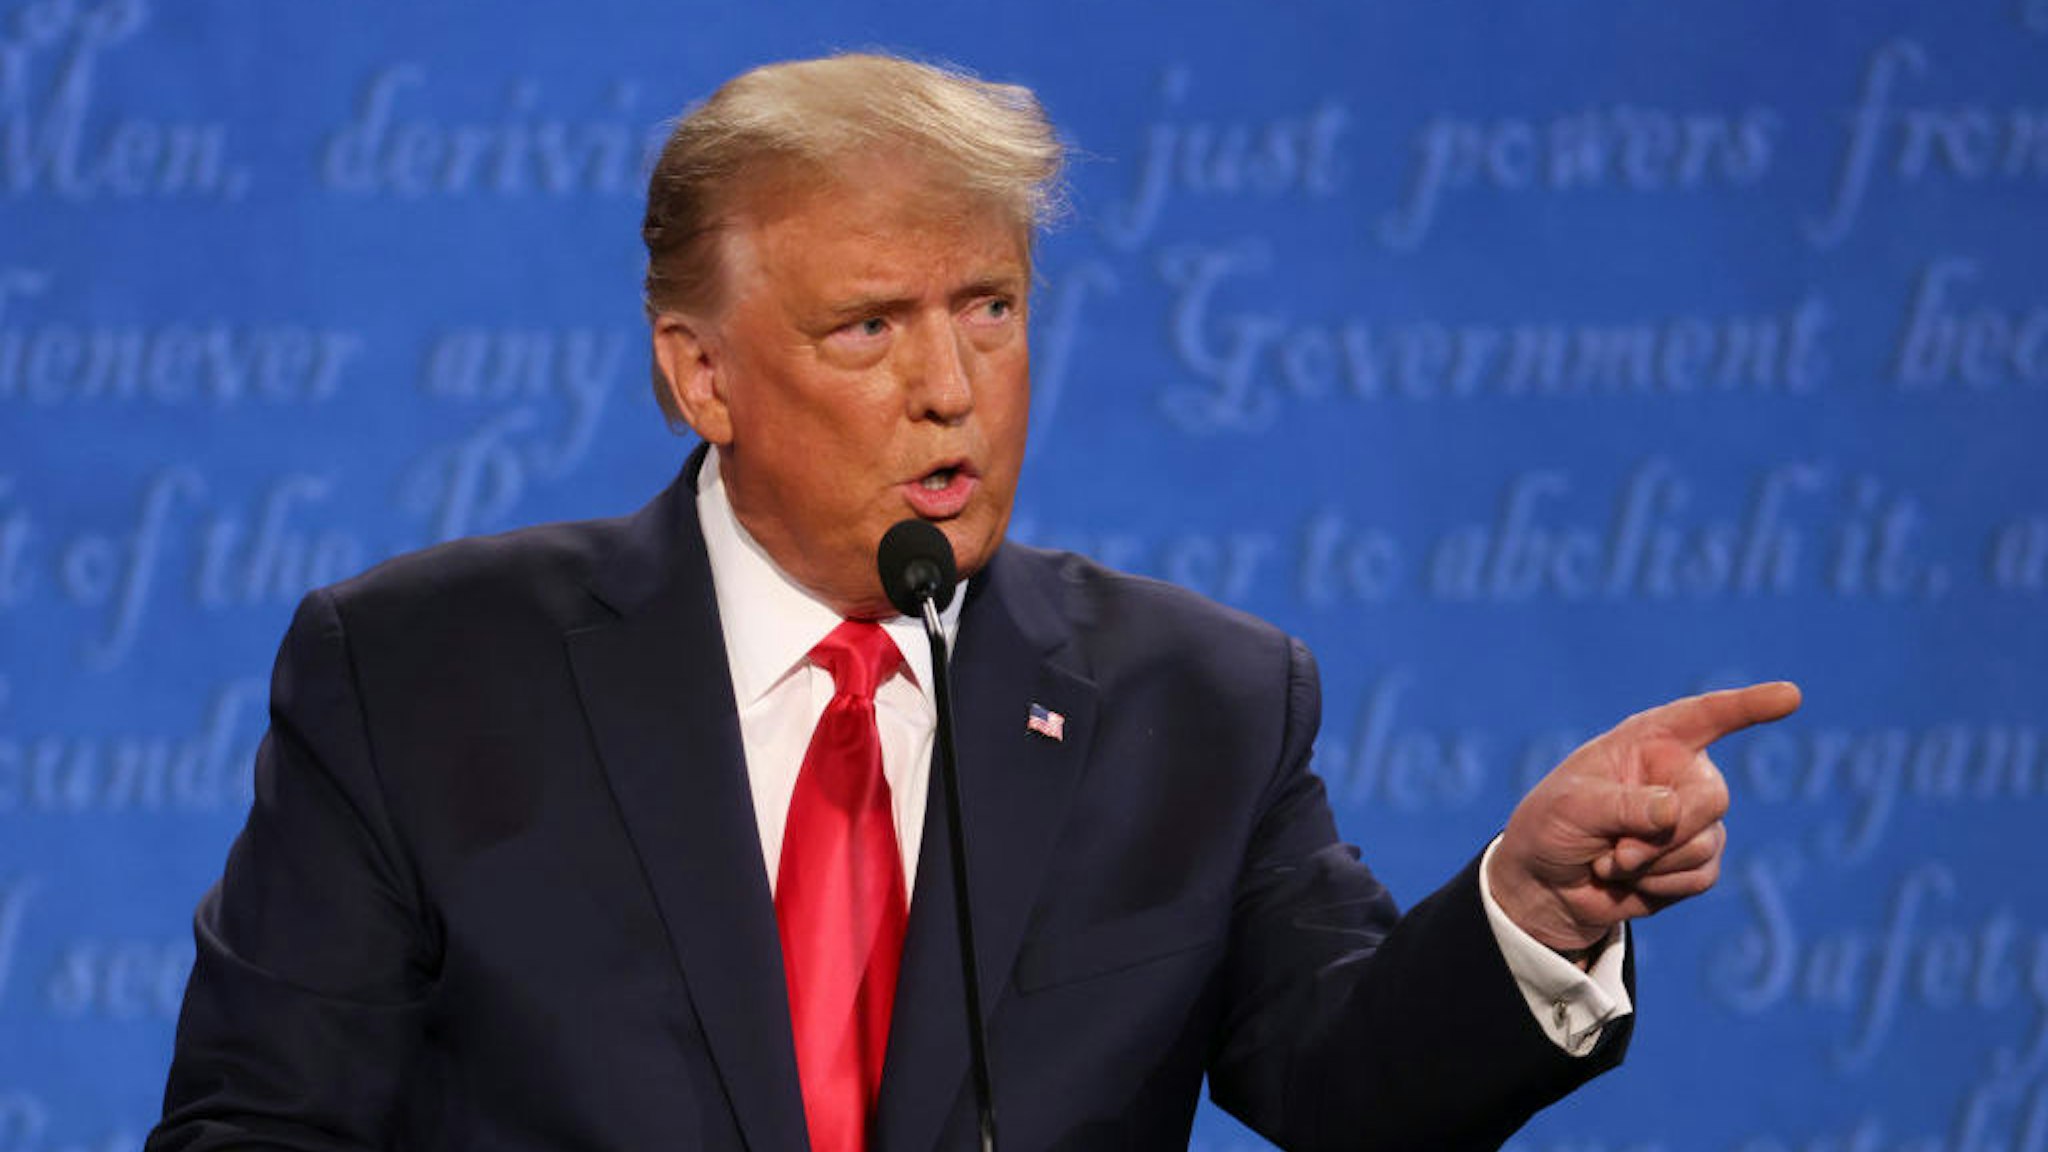 NASHVILLE, TENNESSEE - OCTOBER 22: U.S. President Donald Trump participates in the final presidential debate against Democratic presidential nominee Joe Biden at Belmont University on October 22, 2020 in Nashville, Tennessee. This is the last debate between the two candidates before the election on November 3. (Photo by Justin Sullivan/Getty Images)